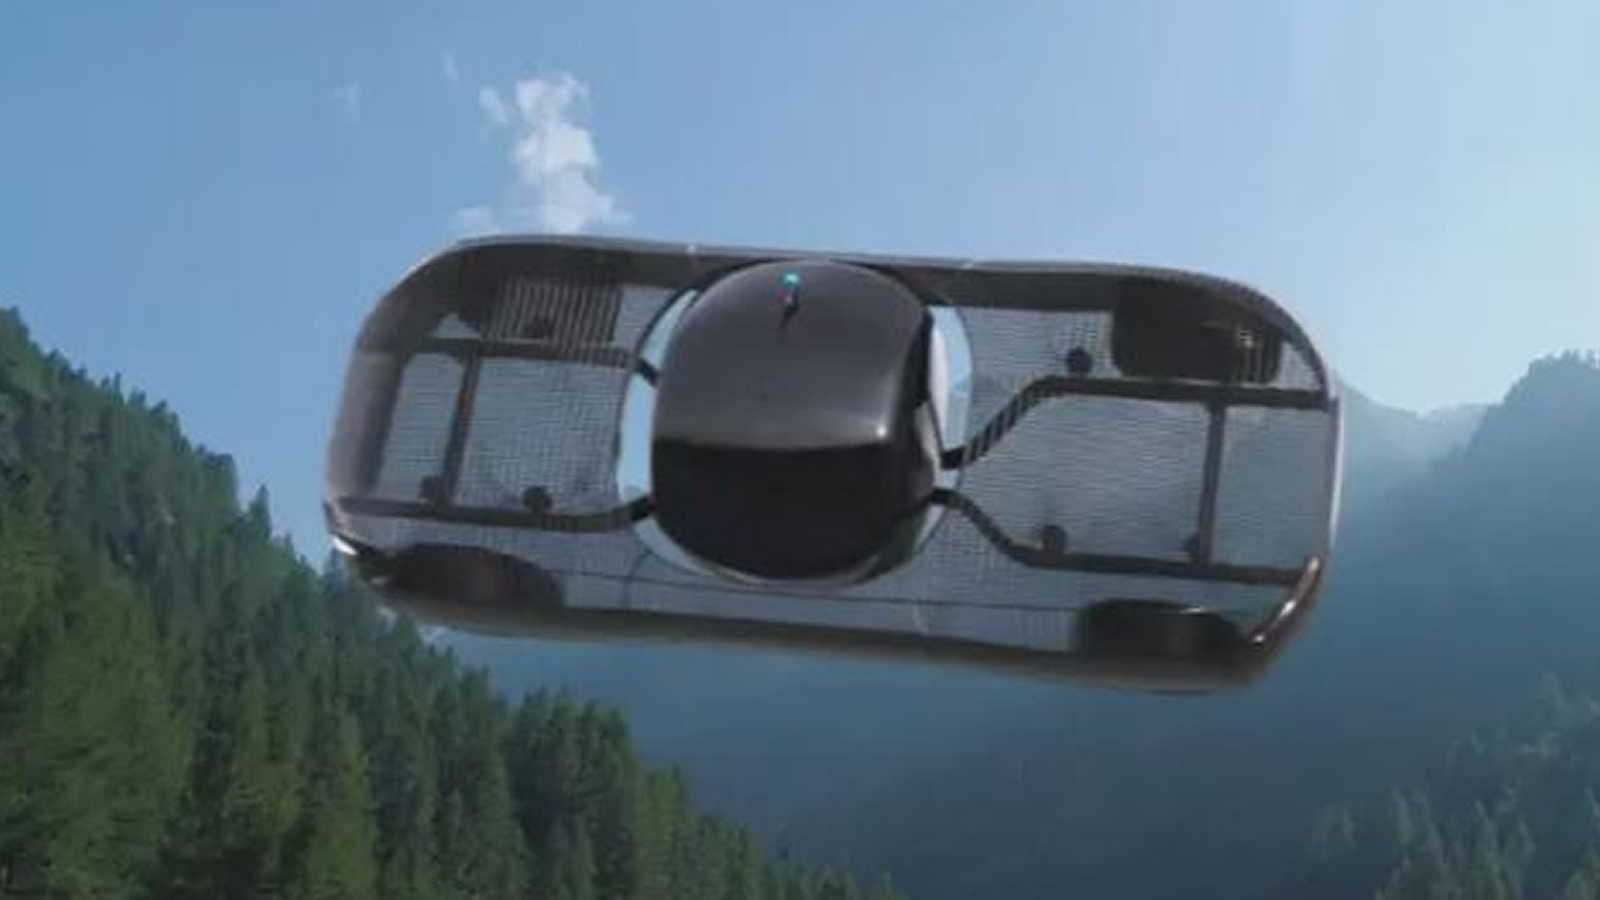 Worlds first flying car now accepting pre orders upon landing approval for flight tests